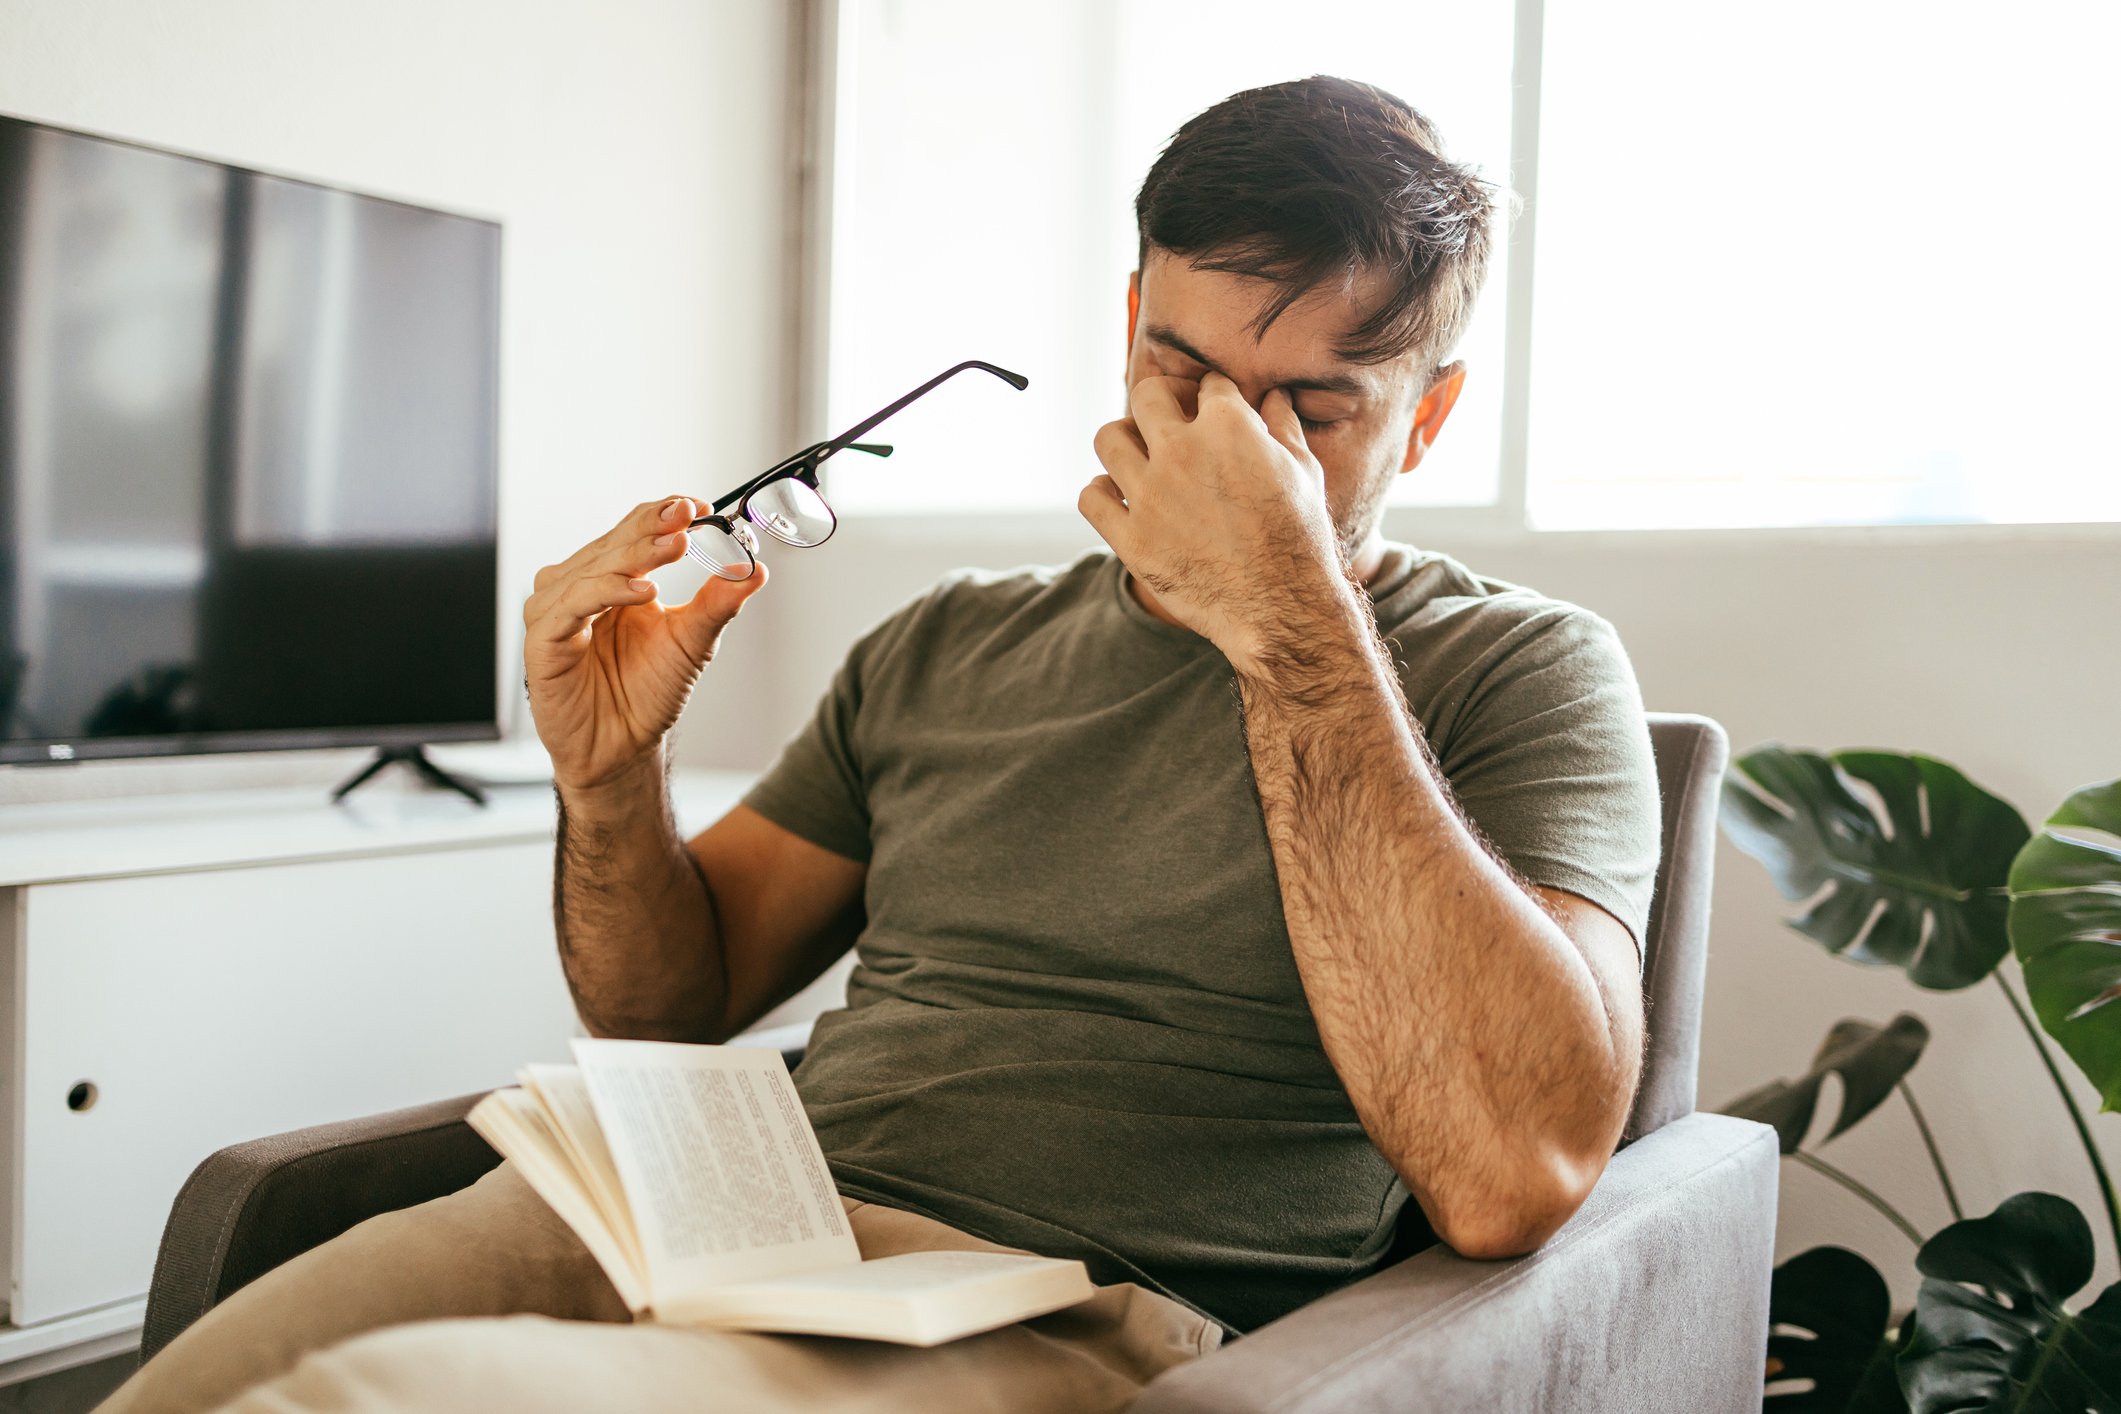 A young man sitting in an armchair at home takes off his glasses to rub his eyes while straining to read a book